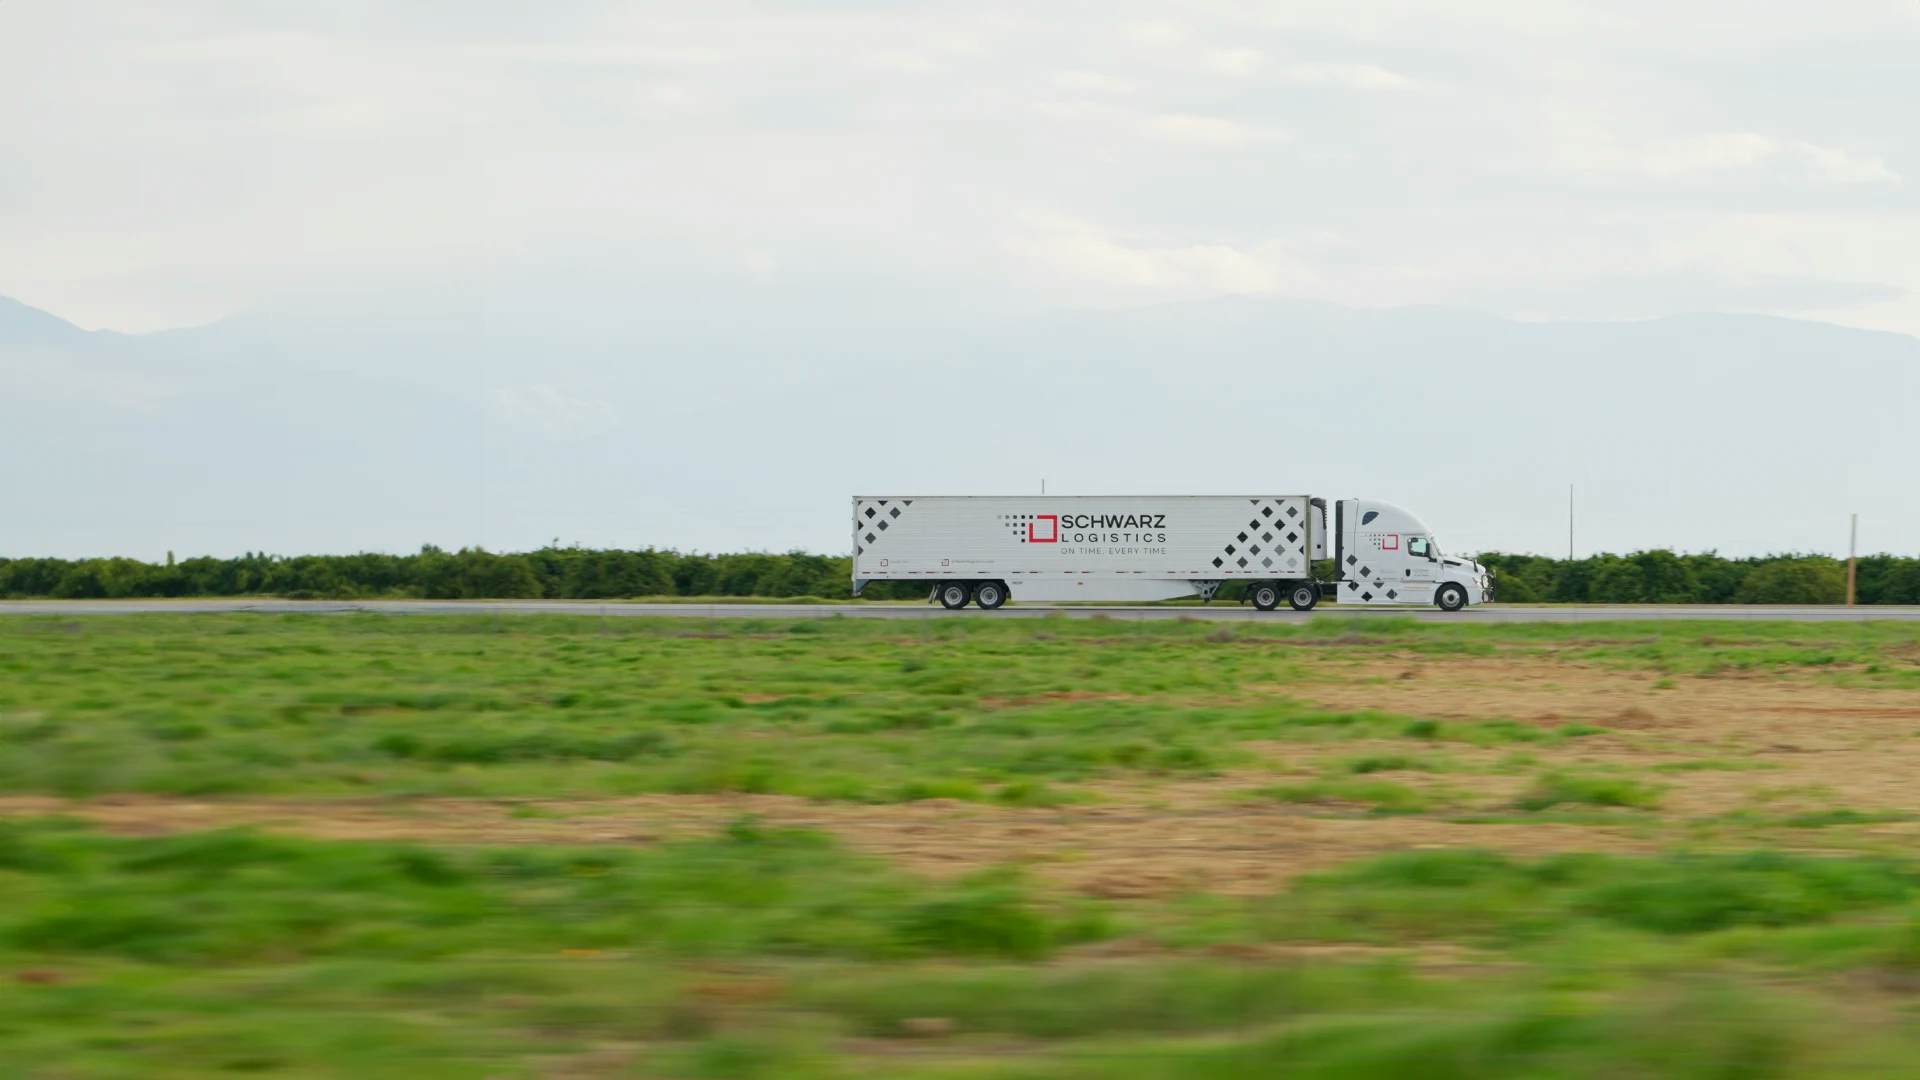 A 'SCHWARZ LOGISTICS' semi-truck is in motion on a rural road, with a clear focus on the moving vehicle against a blurred background of green fields and distant mountains, suggesting speed and efficiency in transportation services.